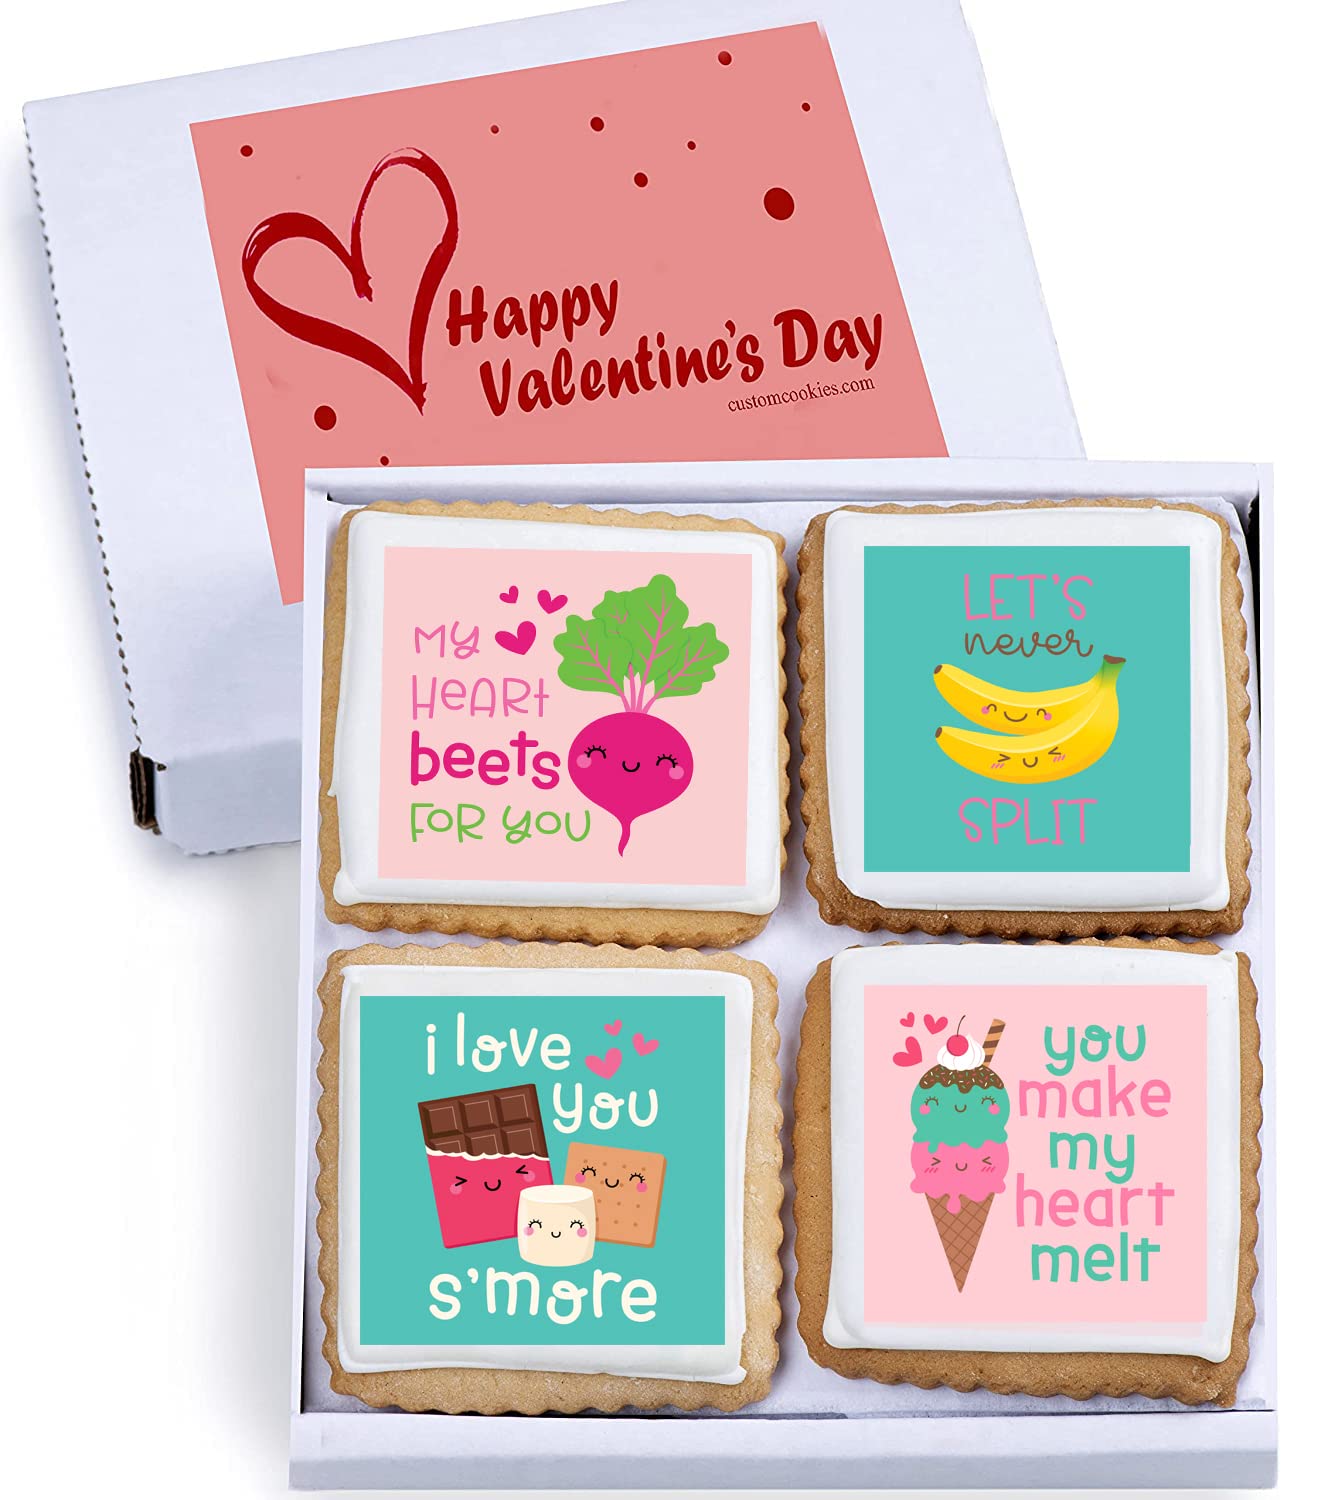 Valentine's Day Gift Ideas for Her, for Him, for Teens & for Kids